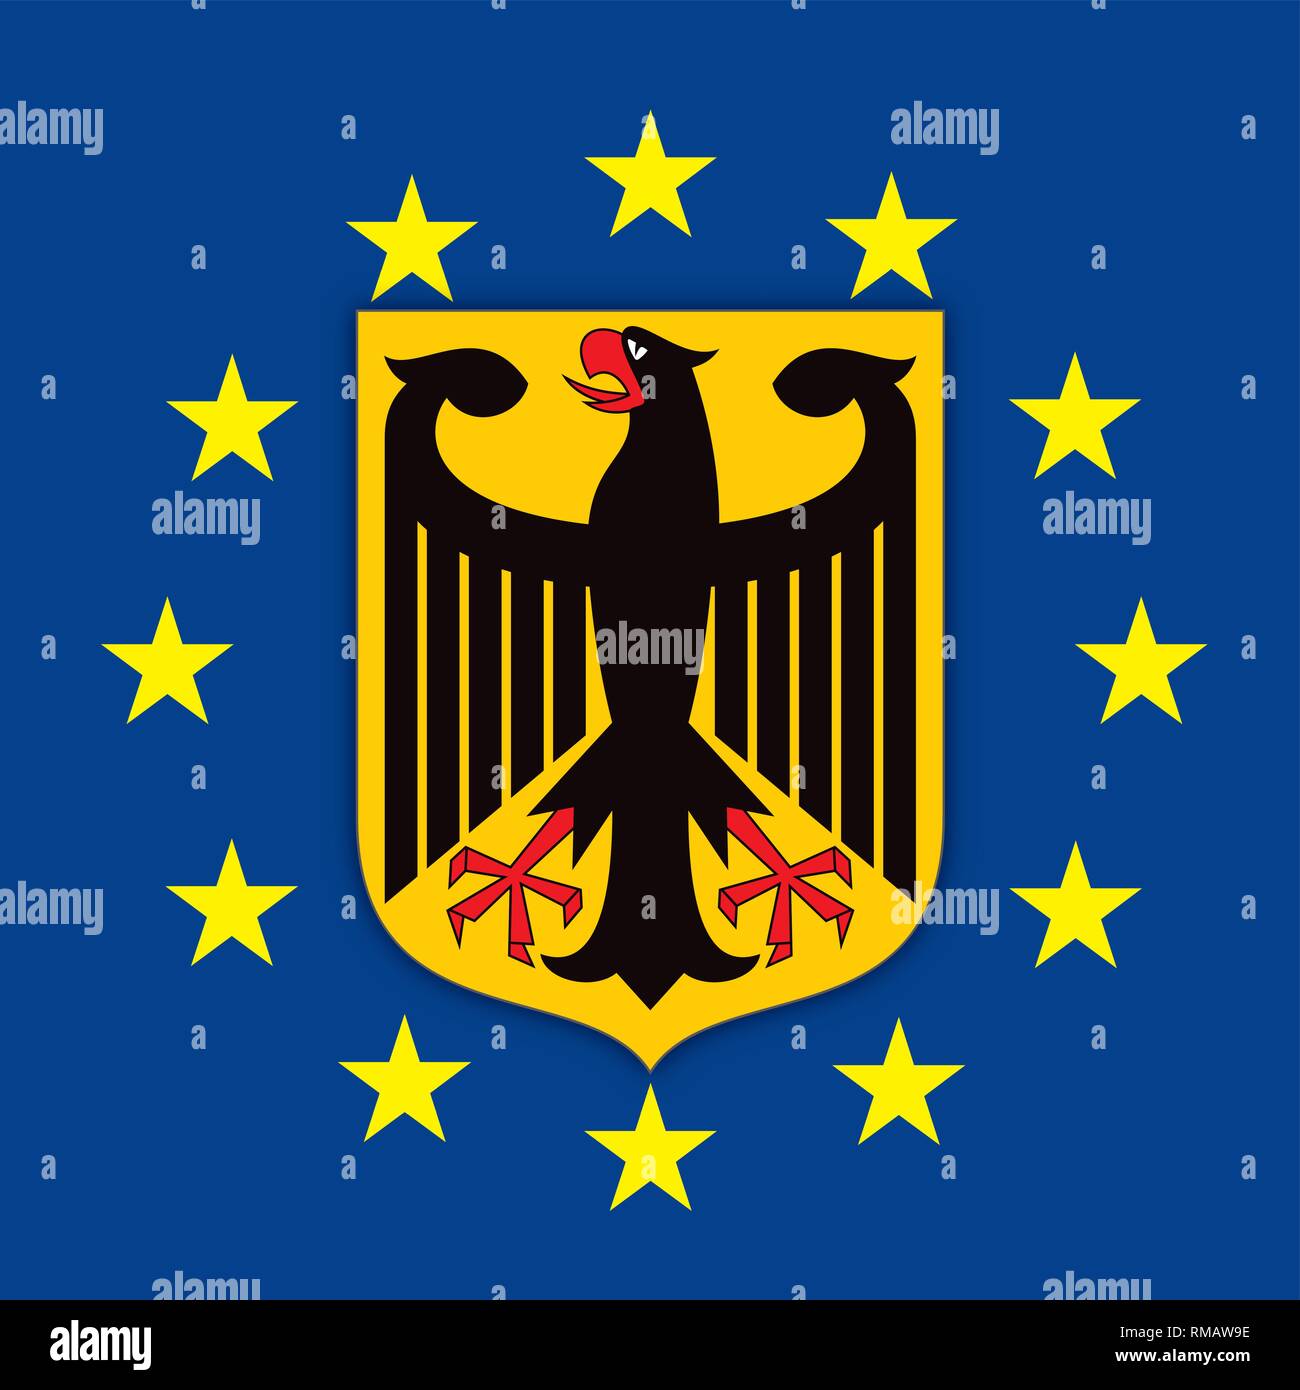 Germany coat of arms on the European Union flag, vector illustration Stock Vector